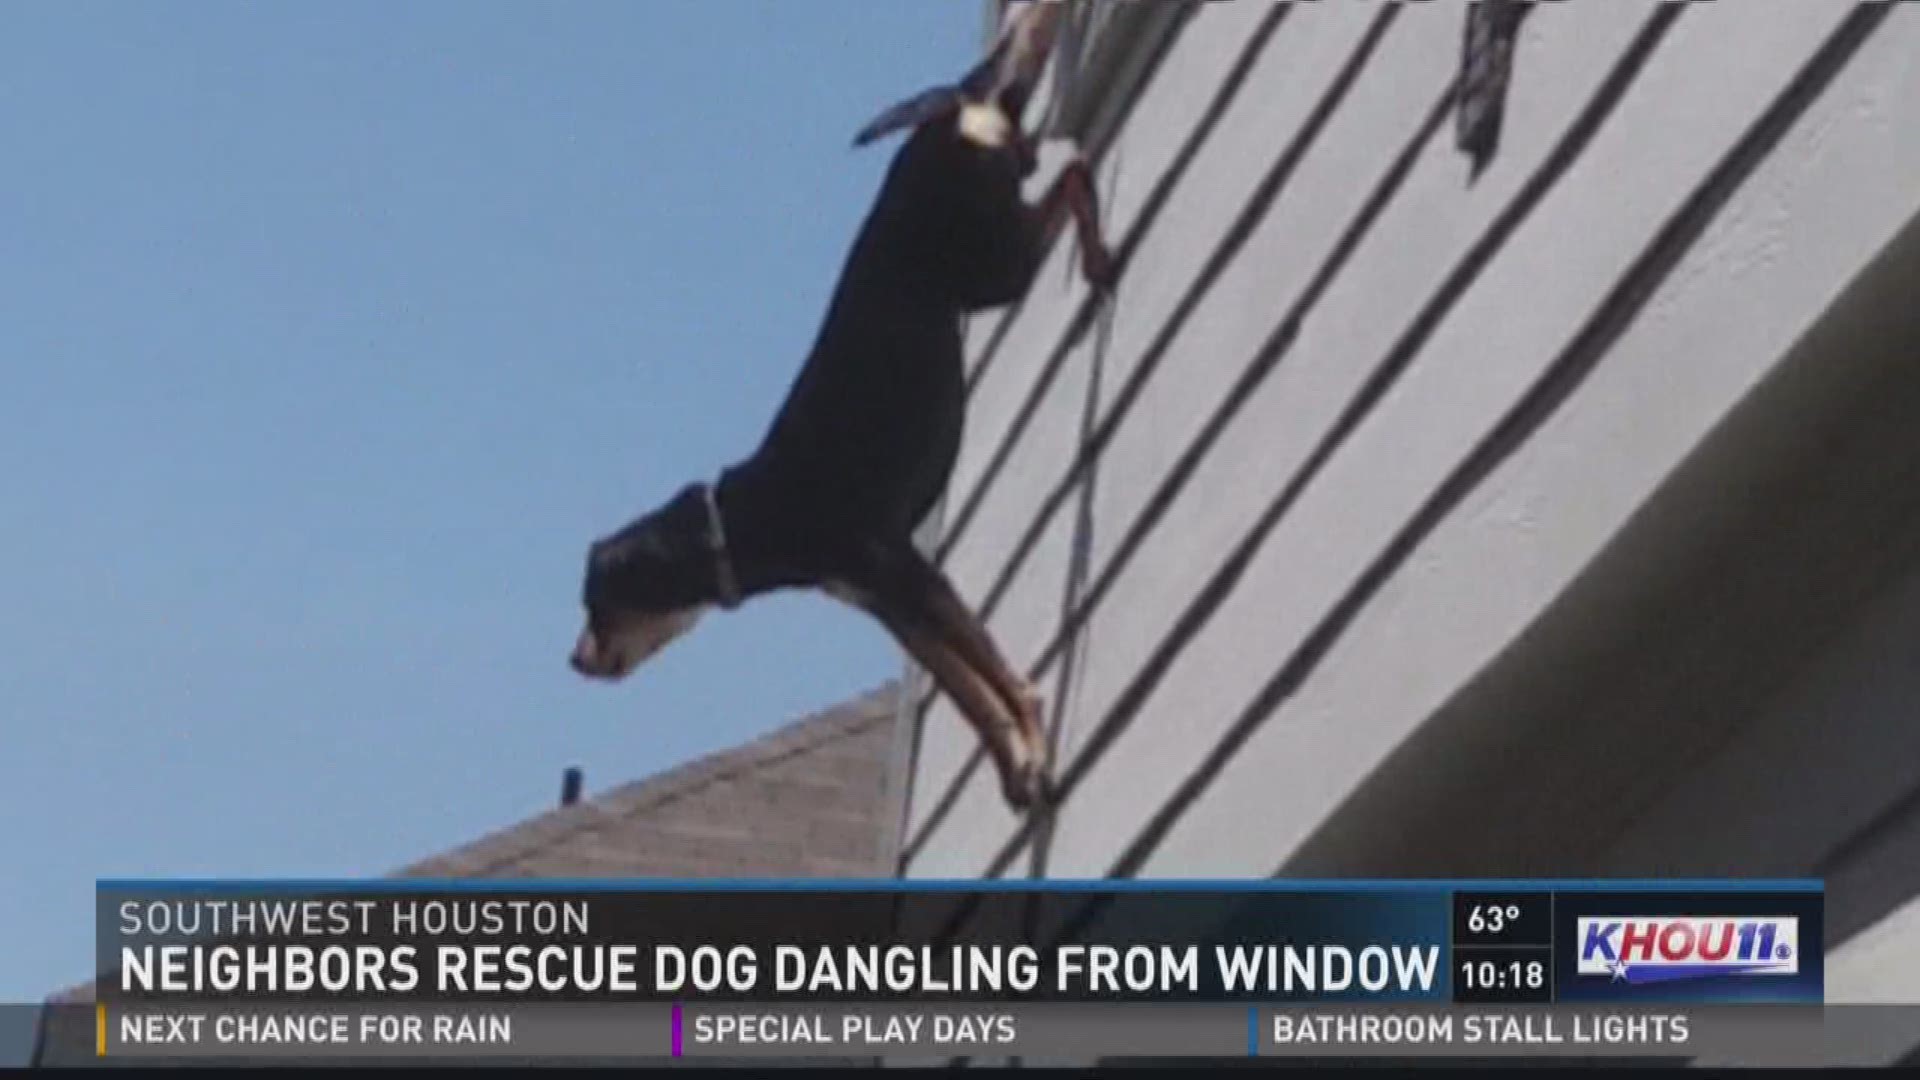 It was a crazy scene in southwest Houston Wednesday where a poor dog was hanging out a second-story window and barking for help.